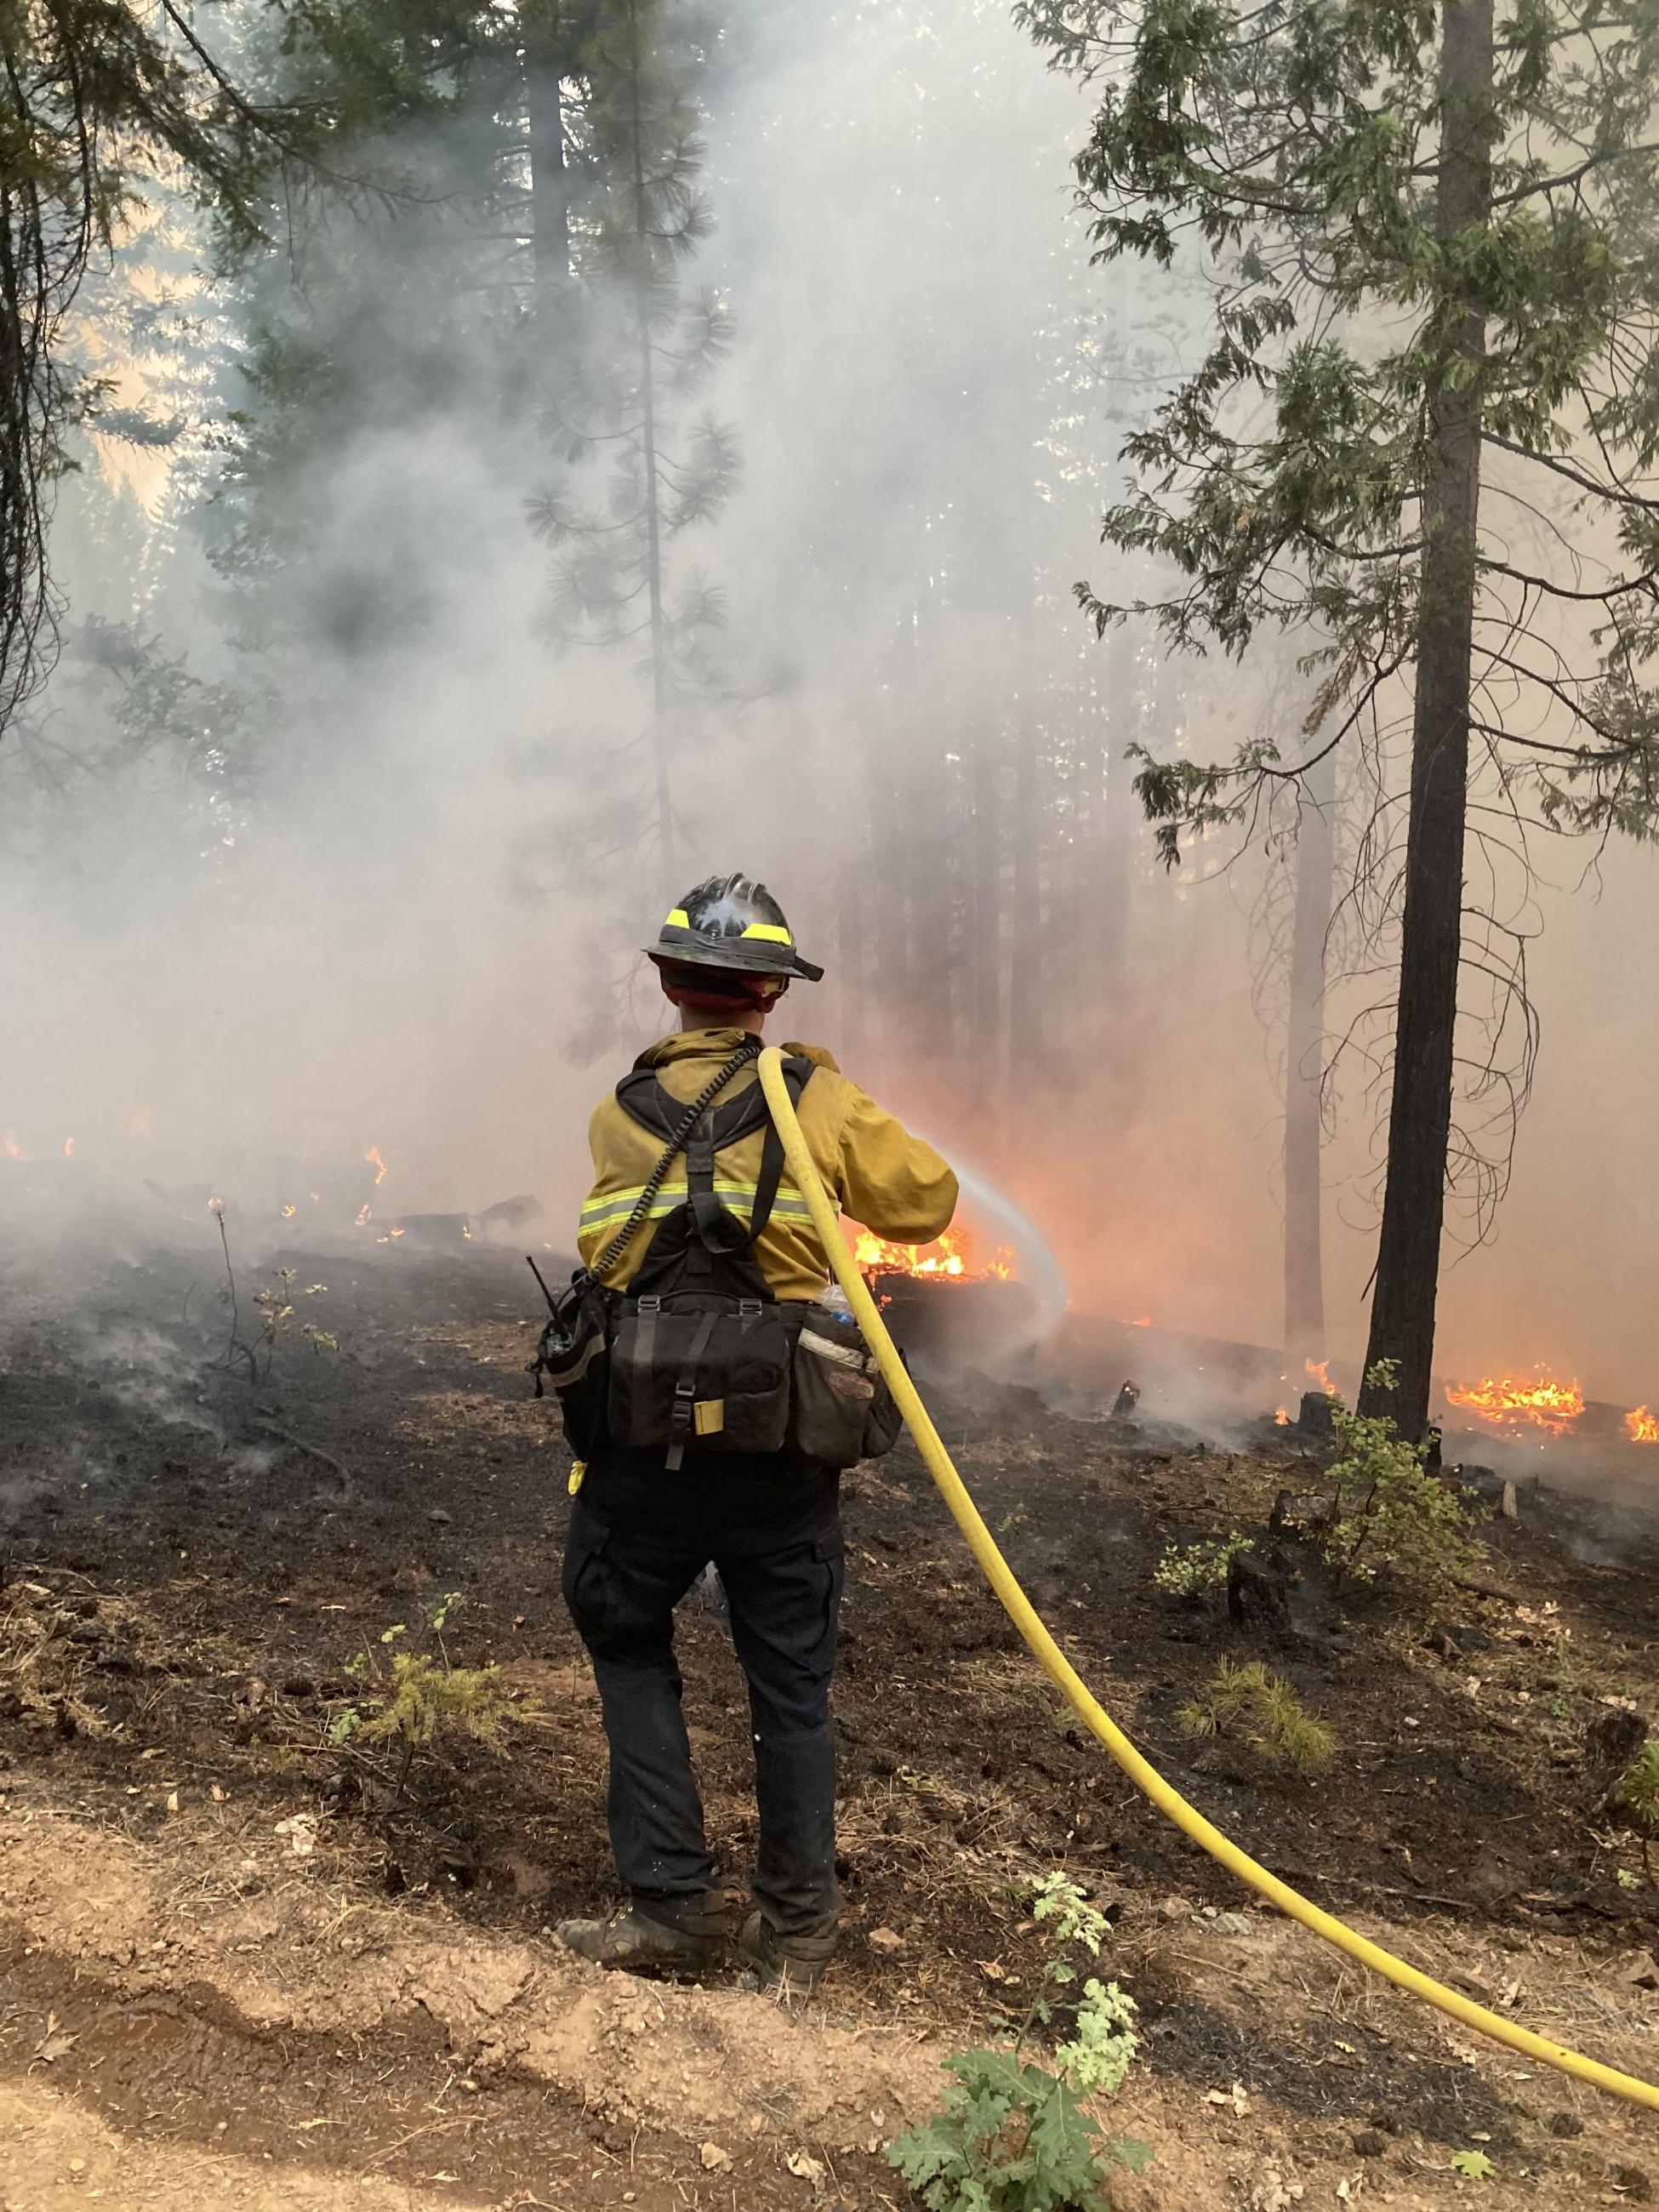 Image of a firefighter holding a hose and spraying water on flames on the Happy Camp Complex August 18, 2023 7:30 pm. Photo USDA Forest Service courtesy Daniel Ramey